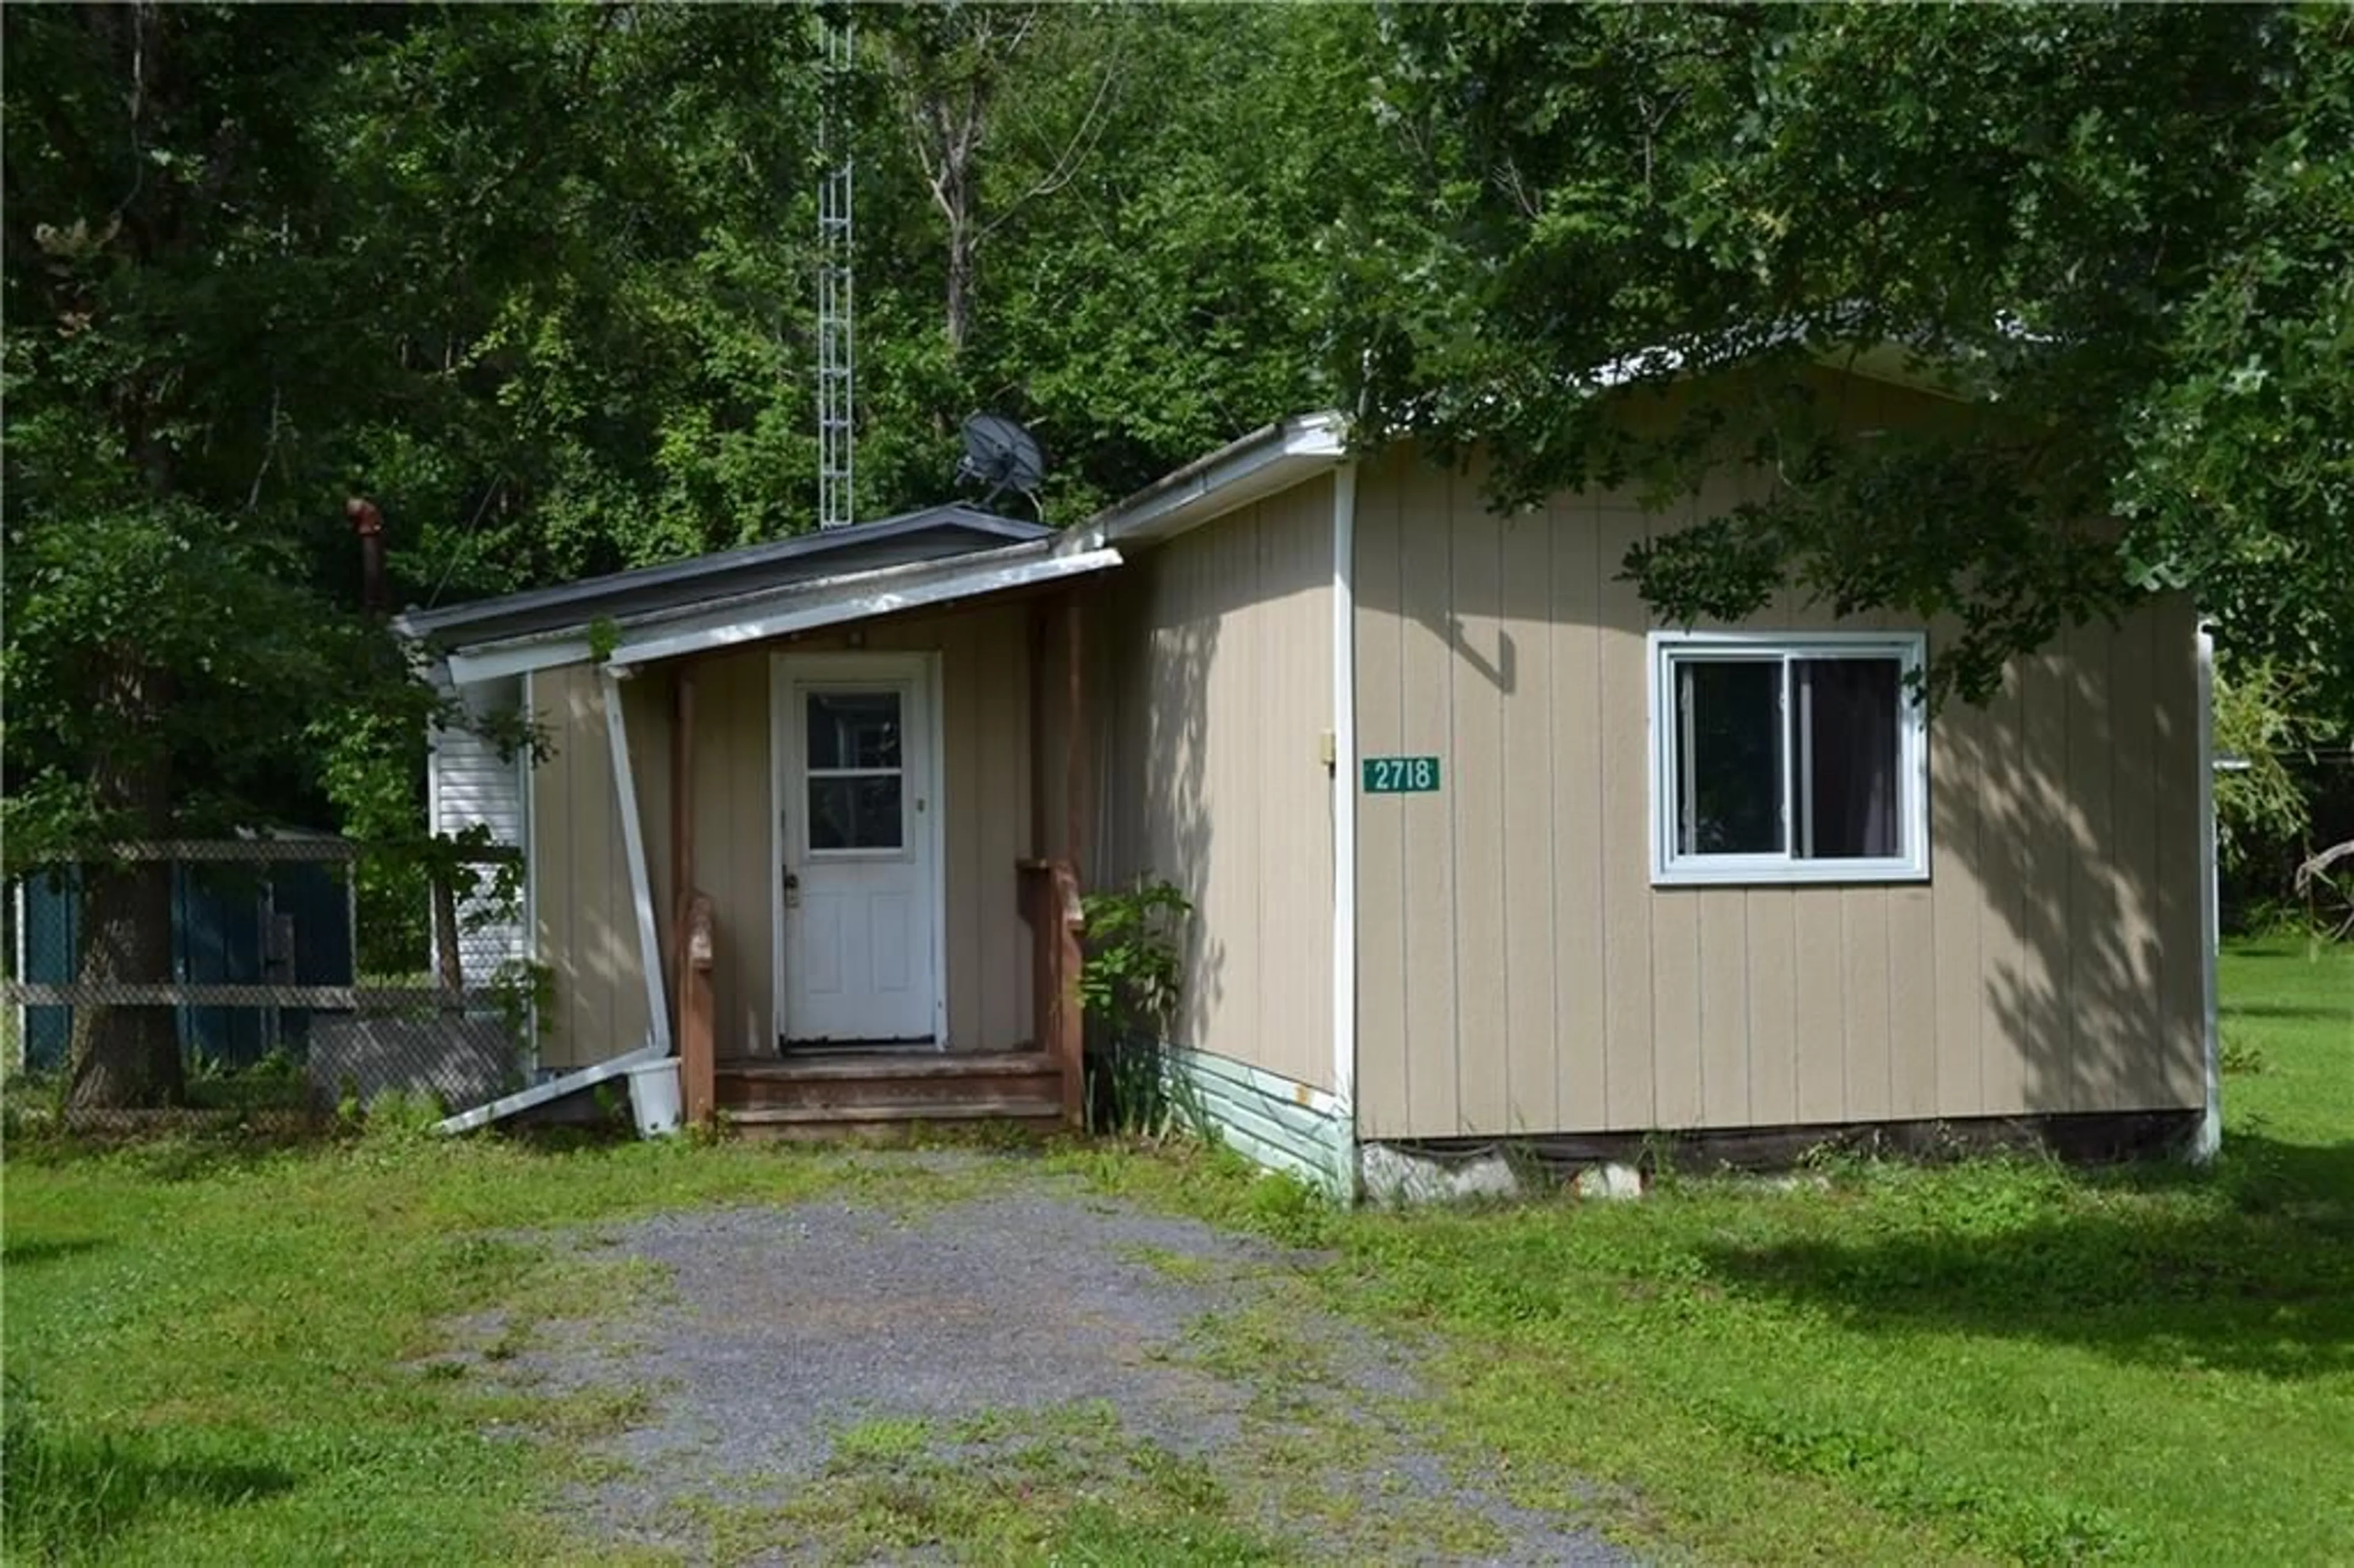 Cottage for 2718 GRYSEWOOD PRIVATE Lane, Maxville Ontario K0C 1T0